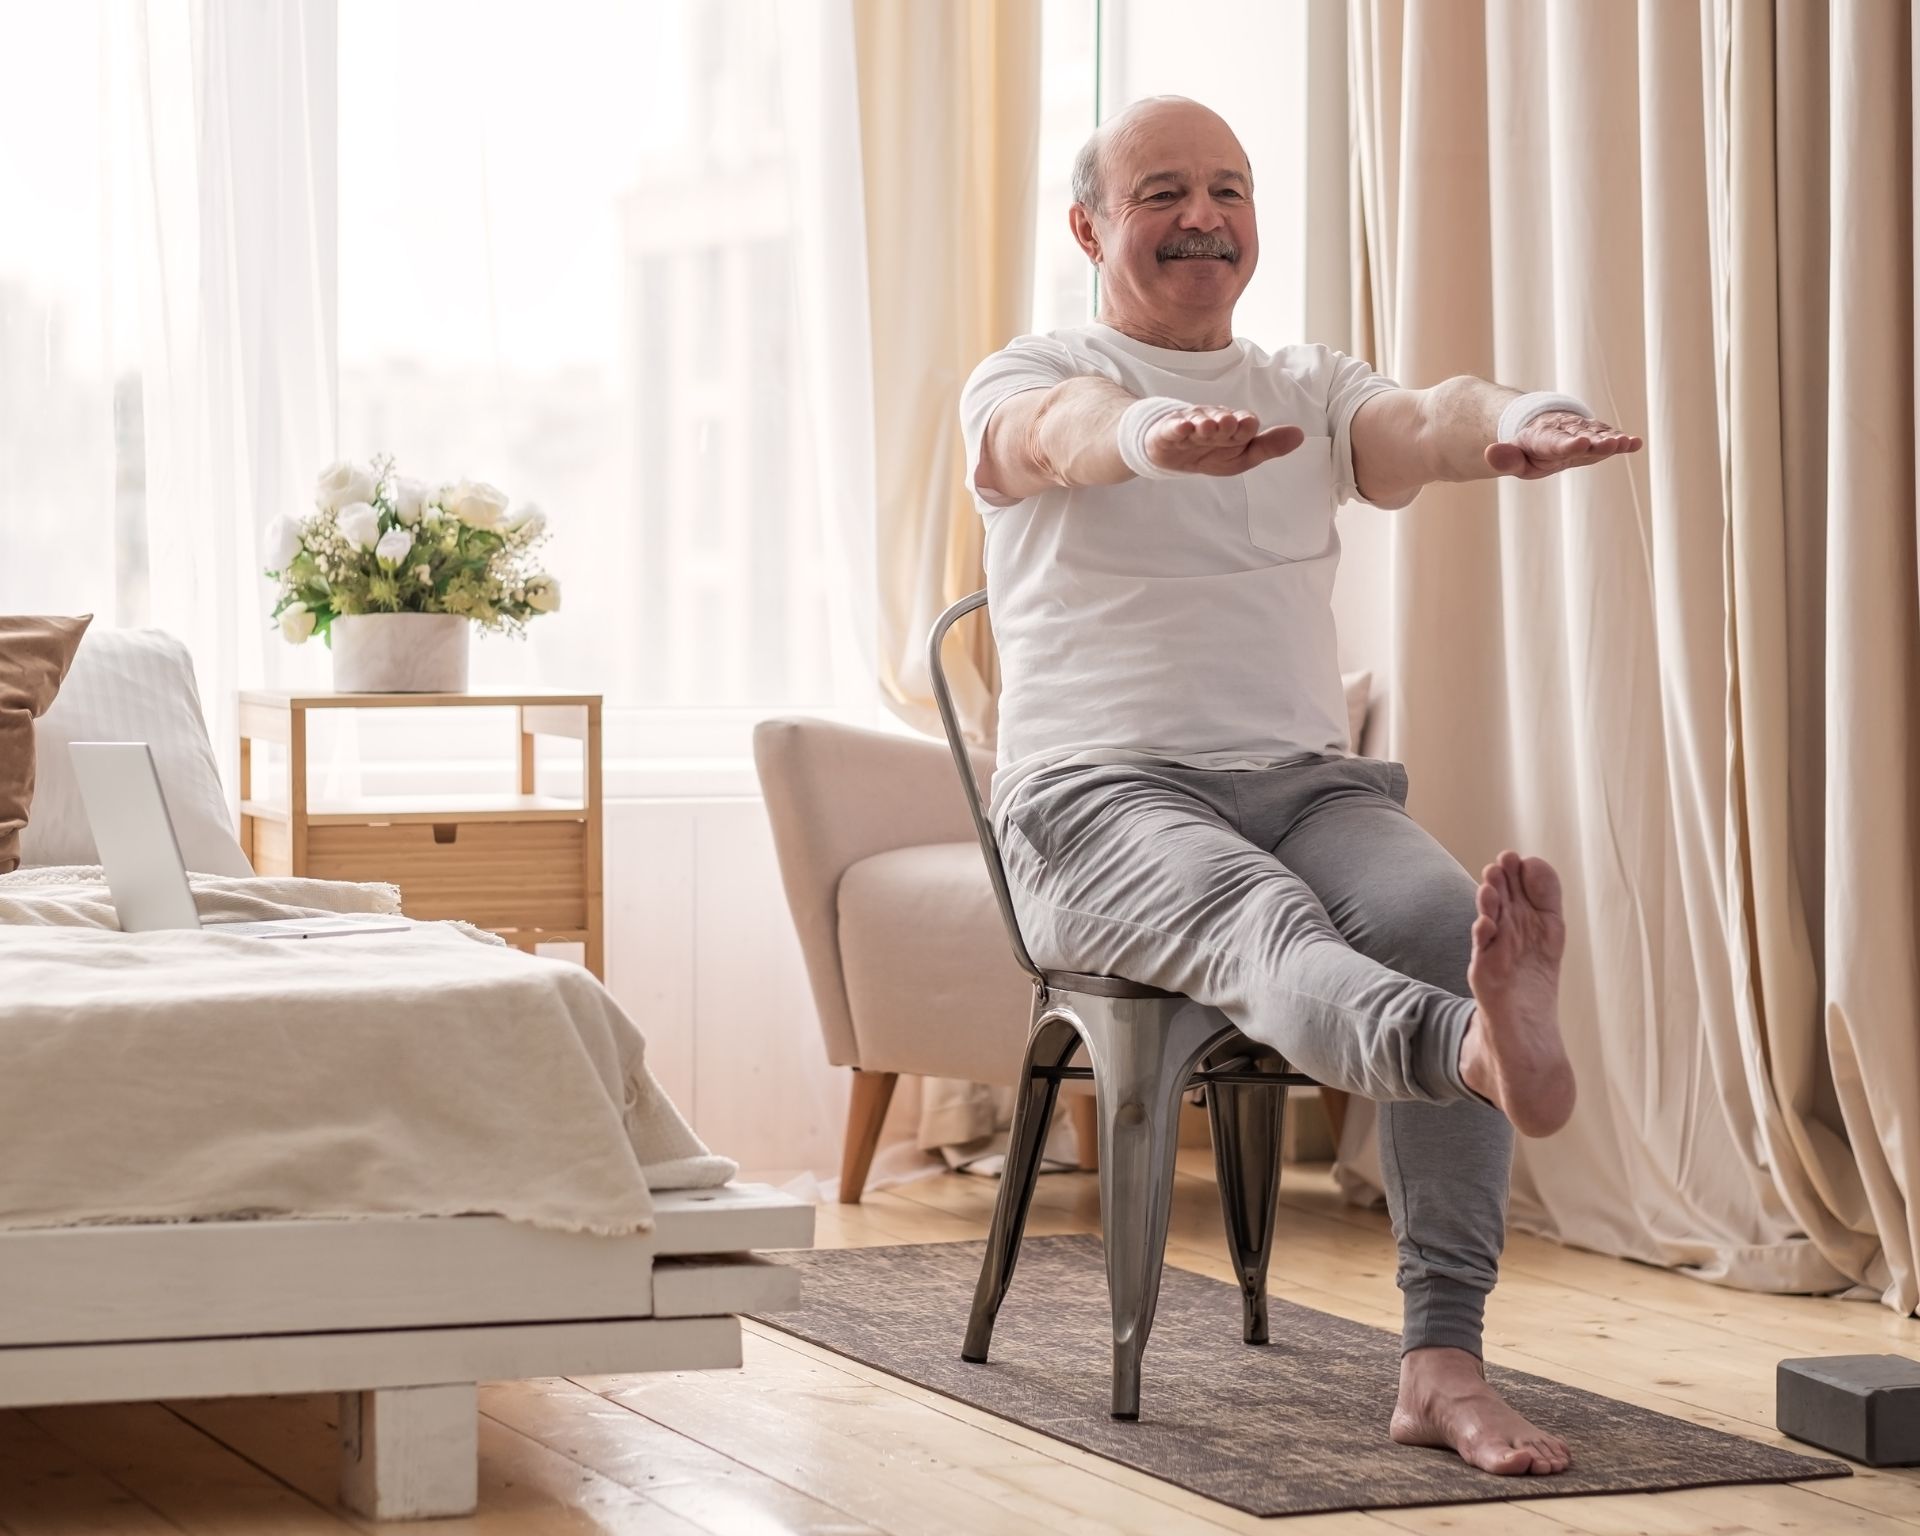 Exercise and Physical Activity for Seniors: A Caregiver’s Role